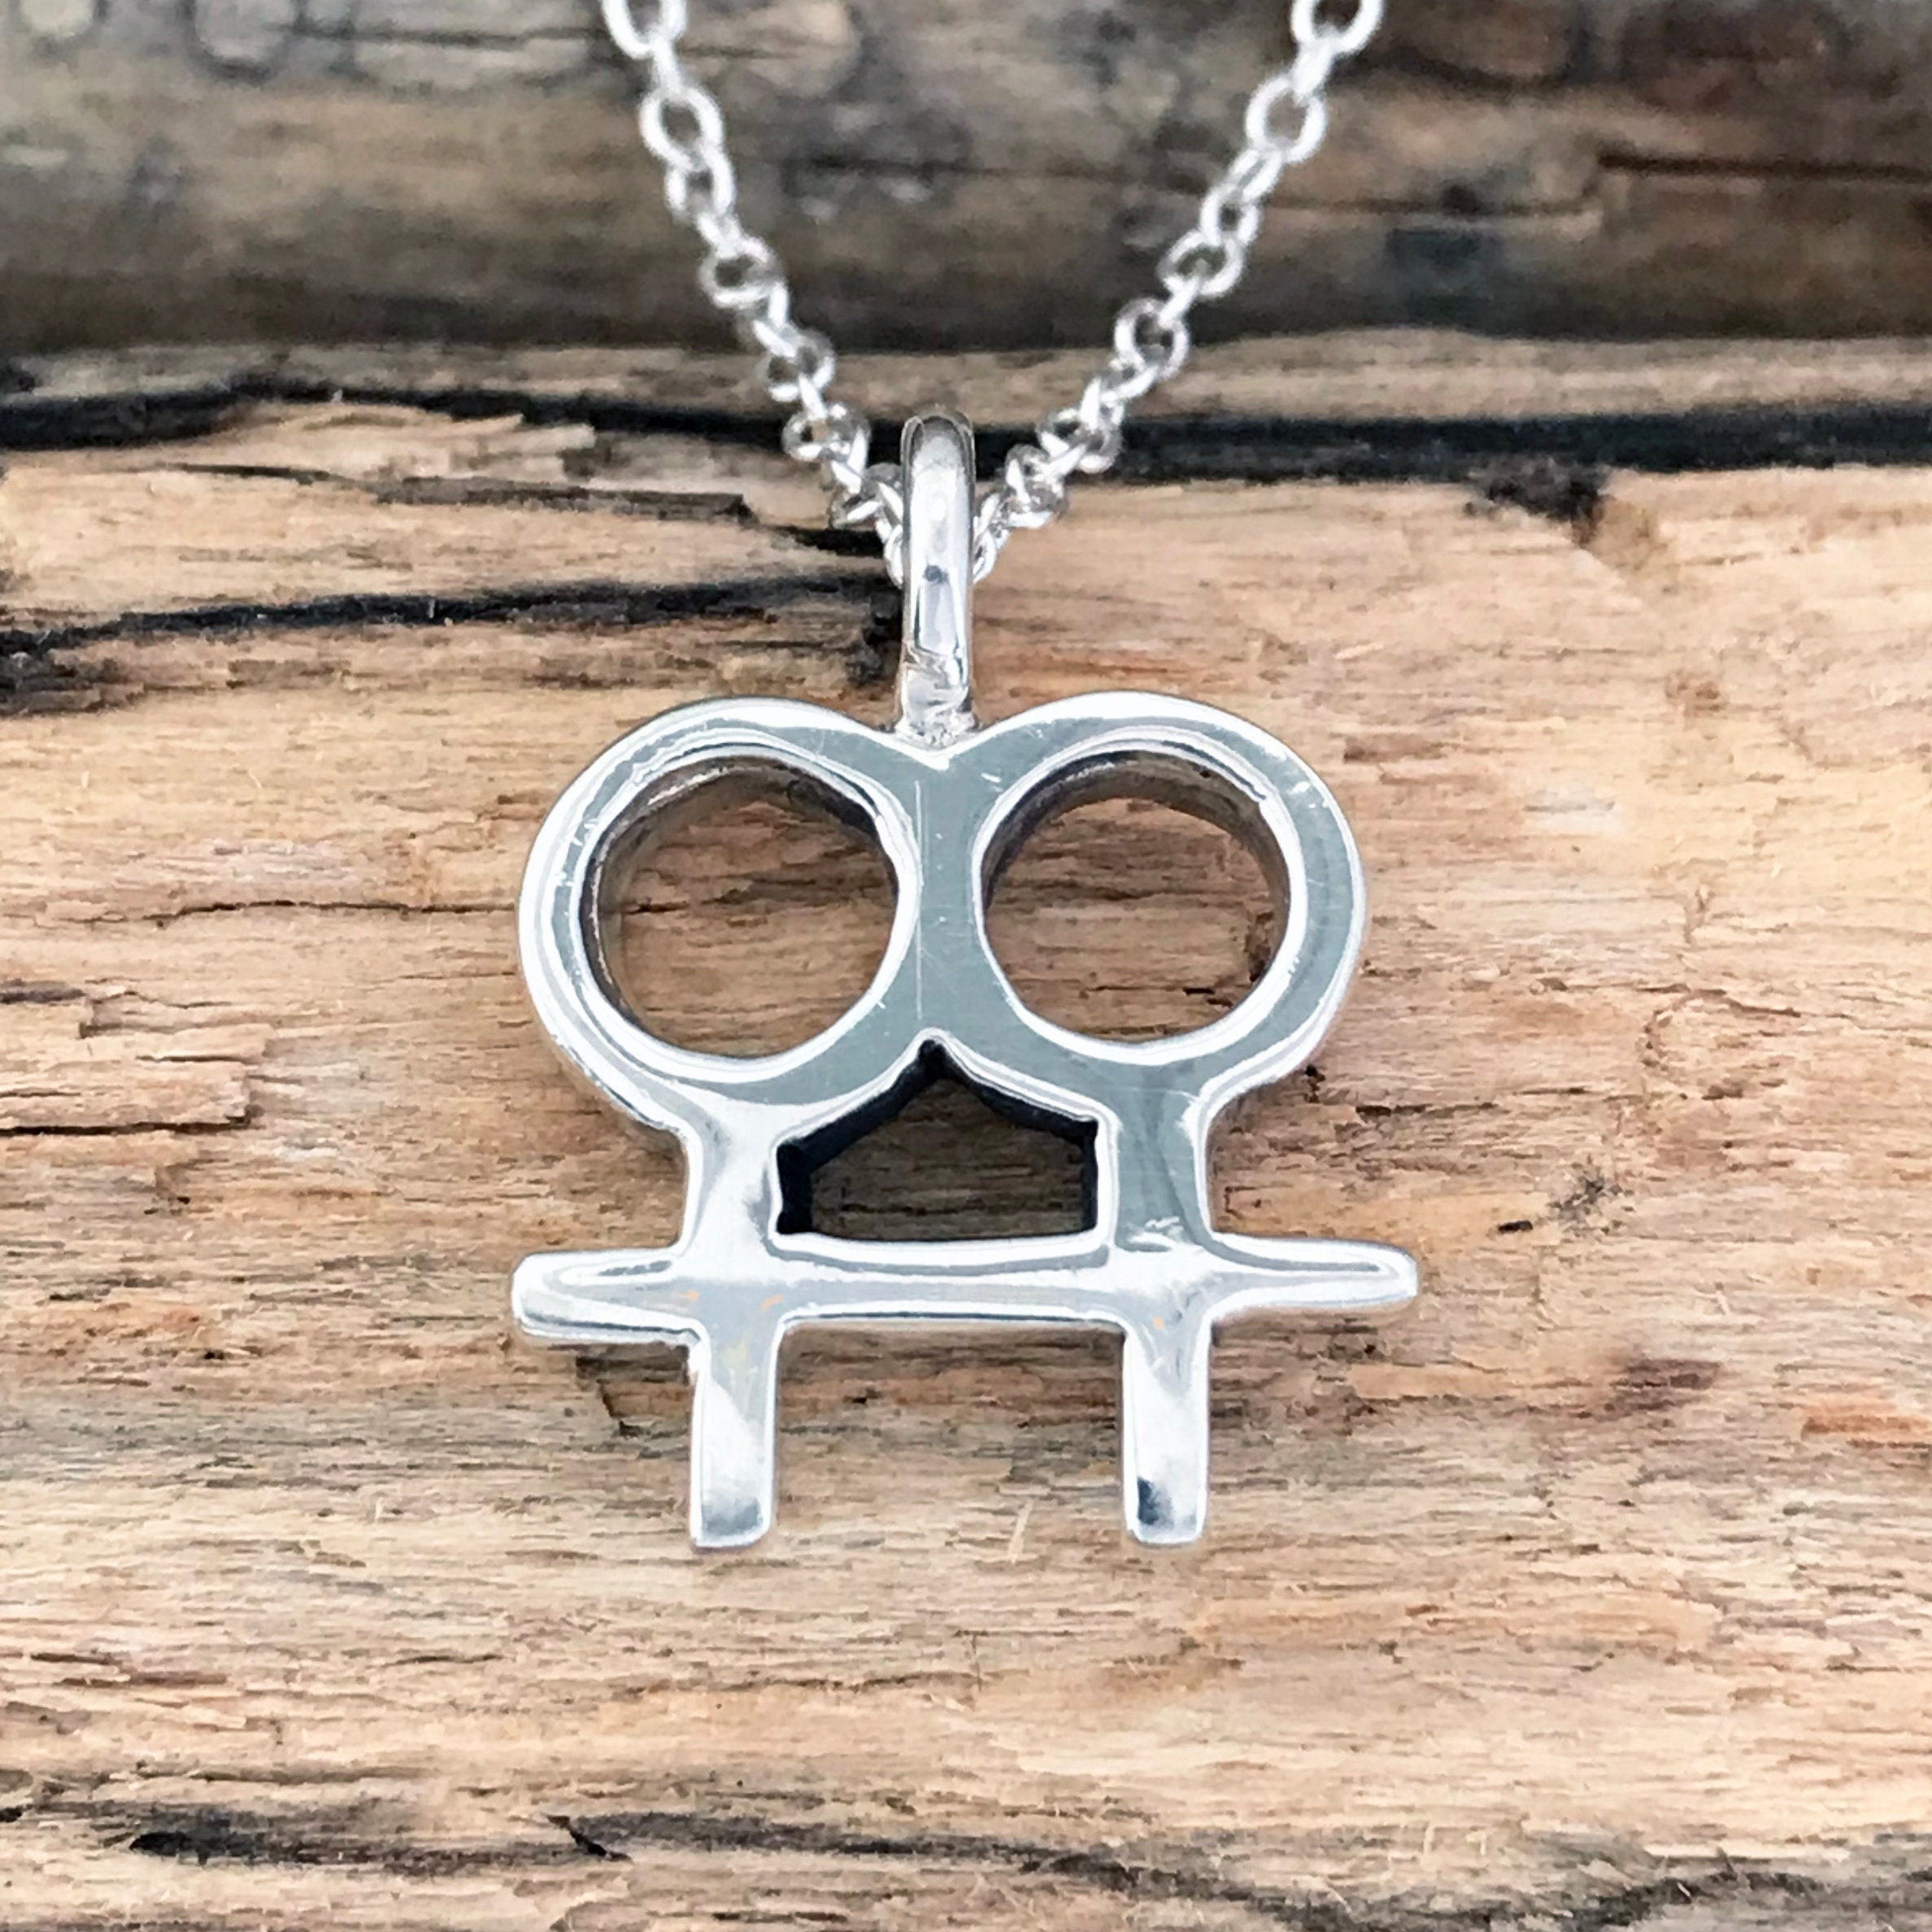 Male Gender Mars Symbol Necklace, 16-36 Long Chain, Men Man Boy Dude Charm  Pendant Sex Sign Jewelry Gift Bag Fast Ship Nb - Etsy